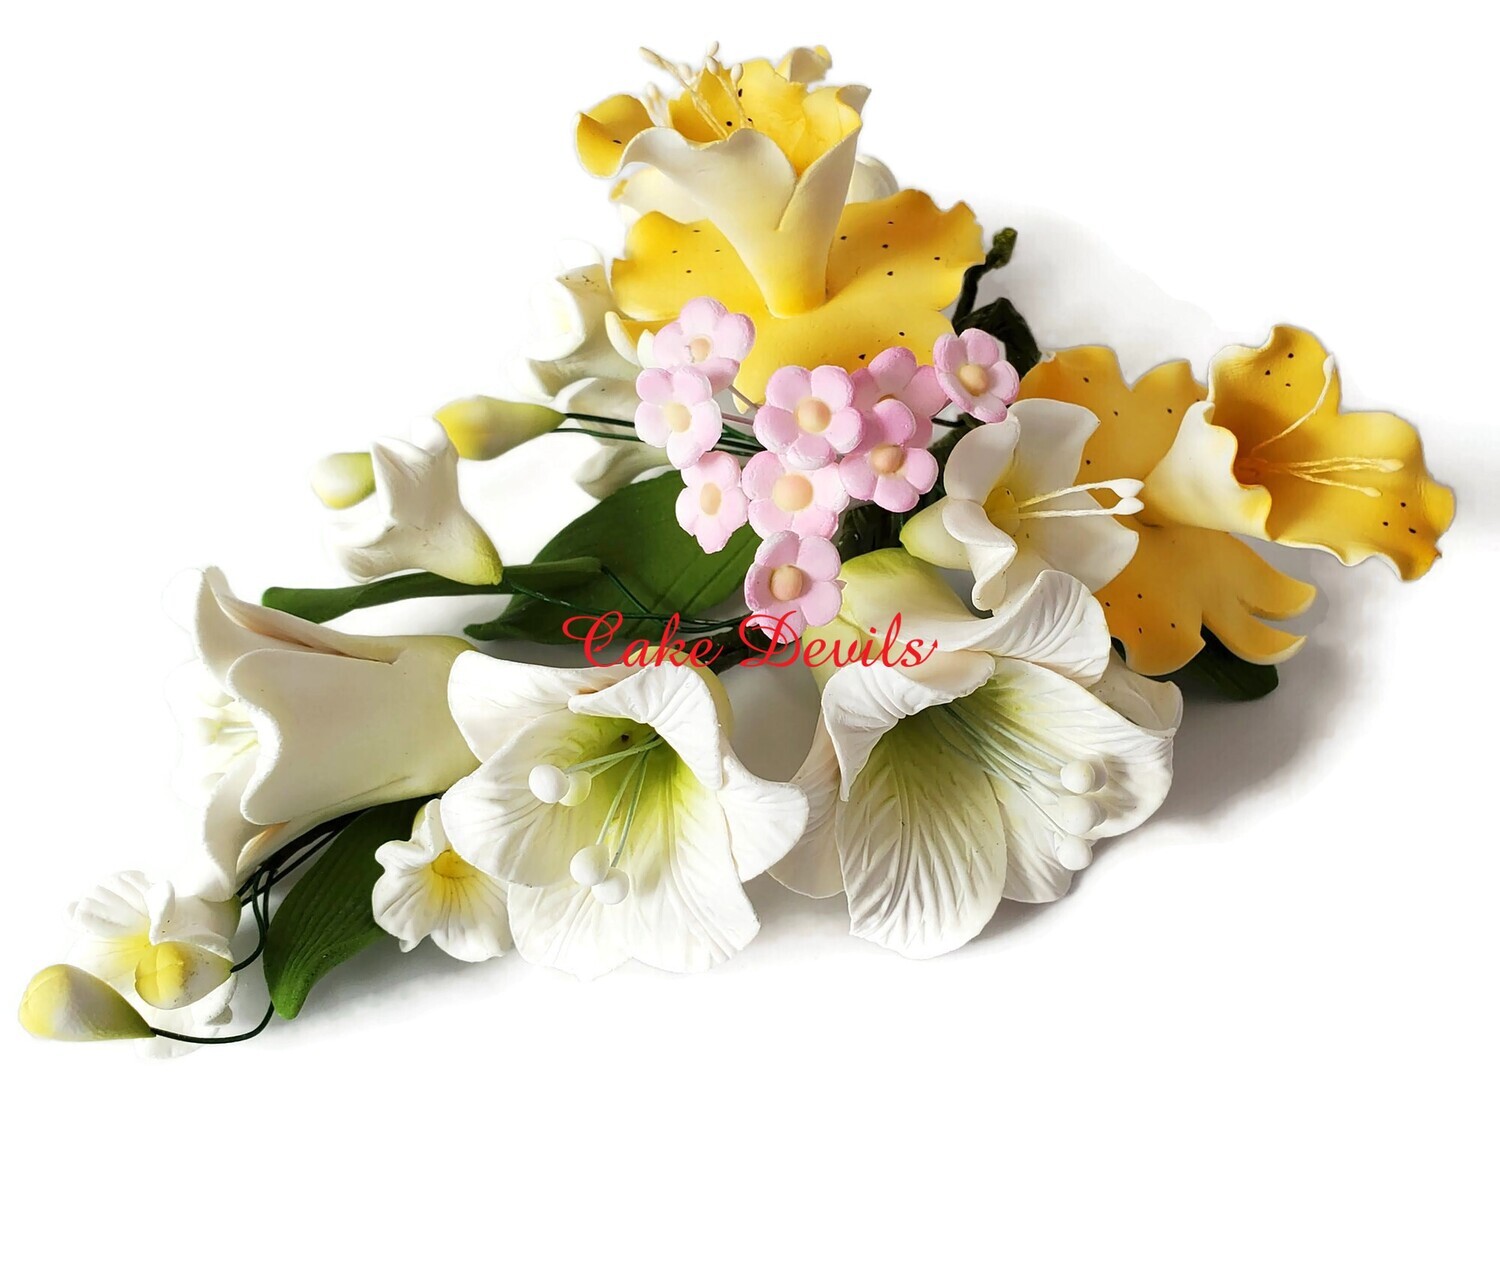 Special! Ready to Ship Spring Flowers! Yellow Orange Fondant Daffodil Cake Topper